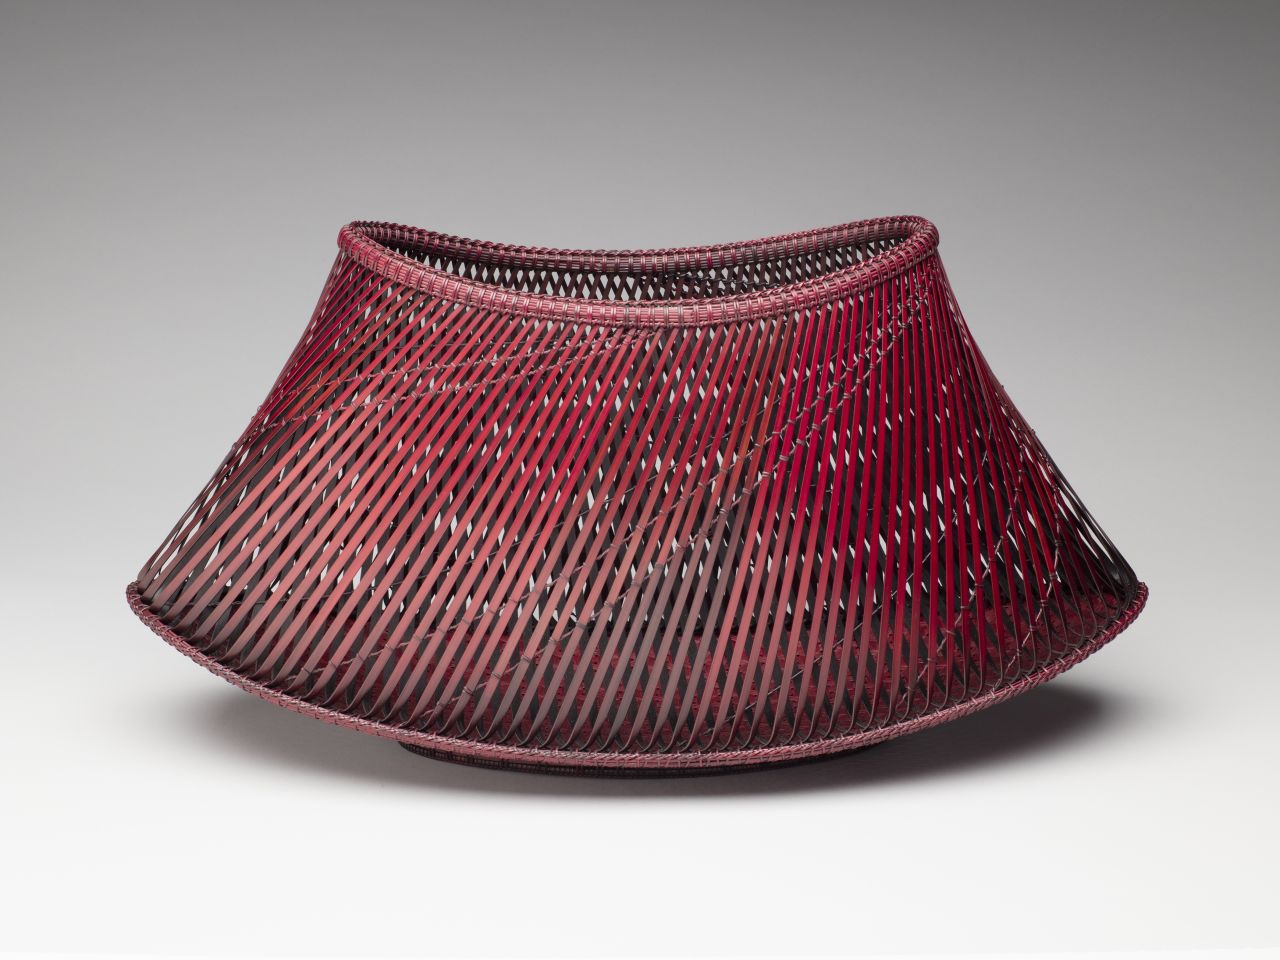 Western interest in bamboo baskets has, since the 1980s, provided Japanese artists with a new market for their work.